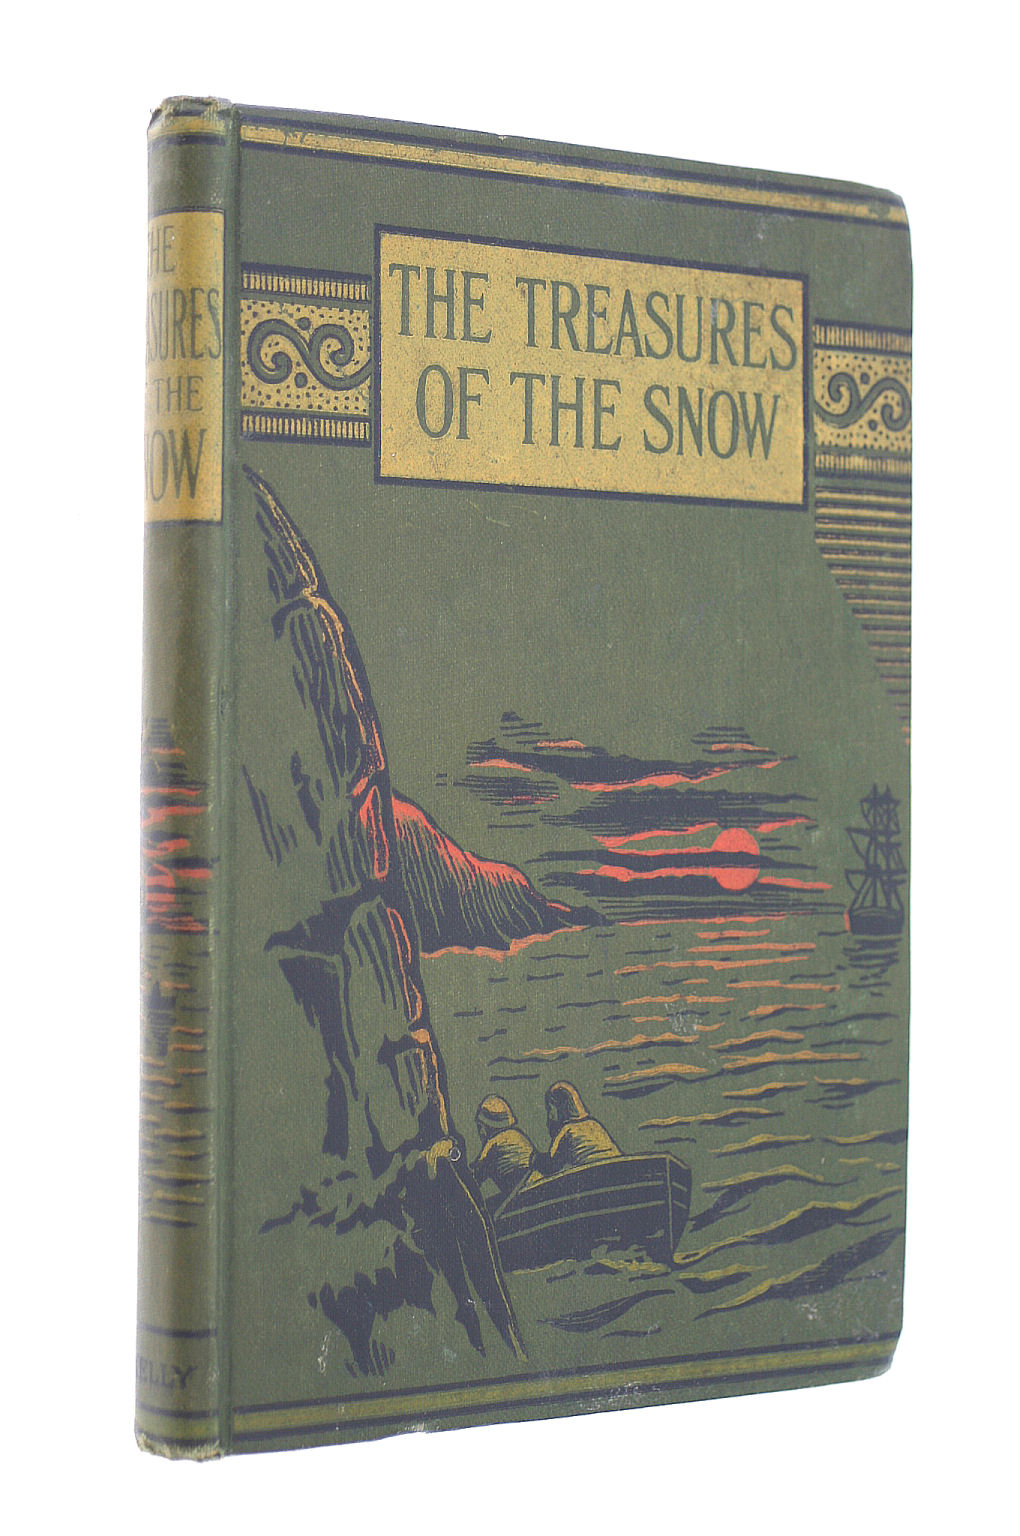 THOMAS HIND - The Treasures of the Snow and other talks to children